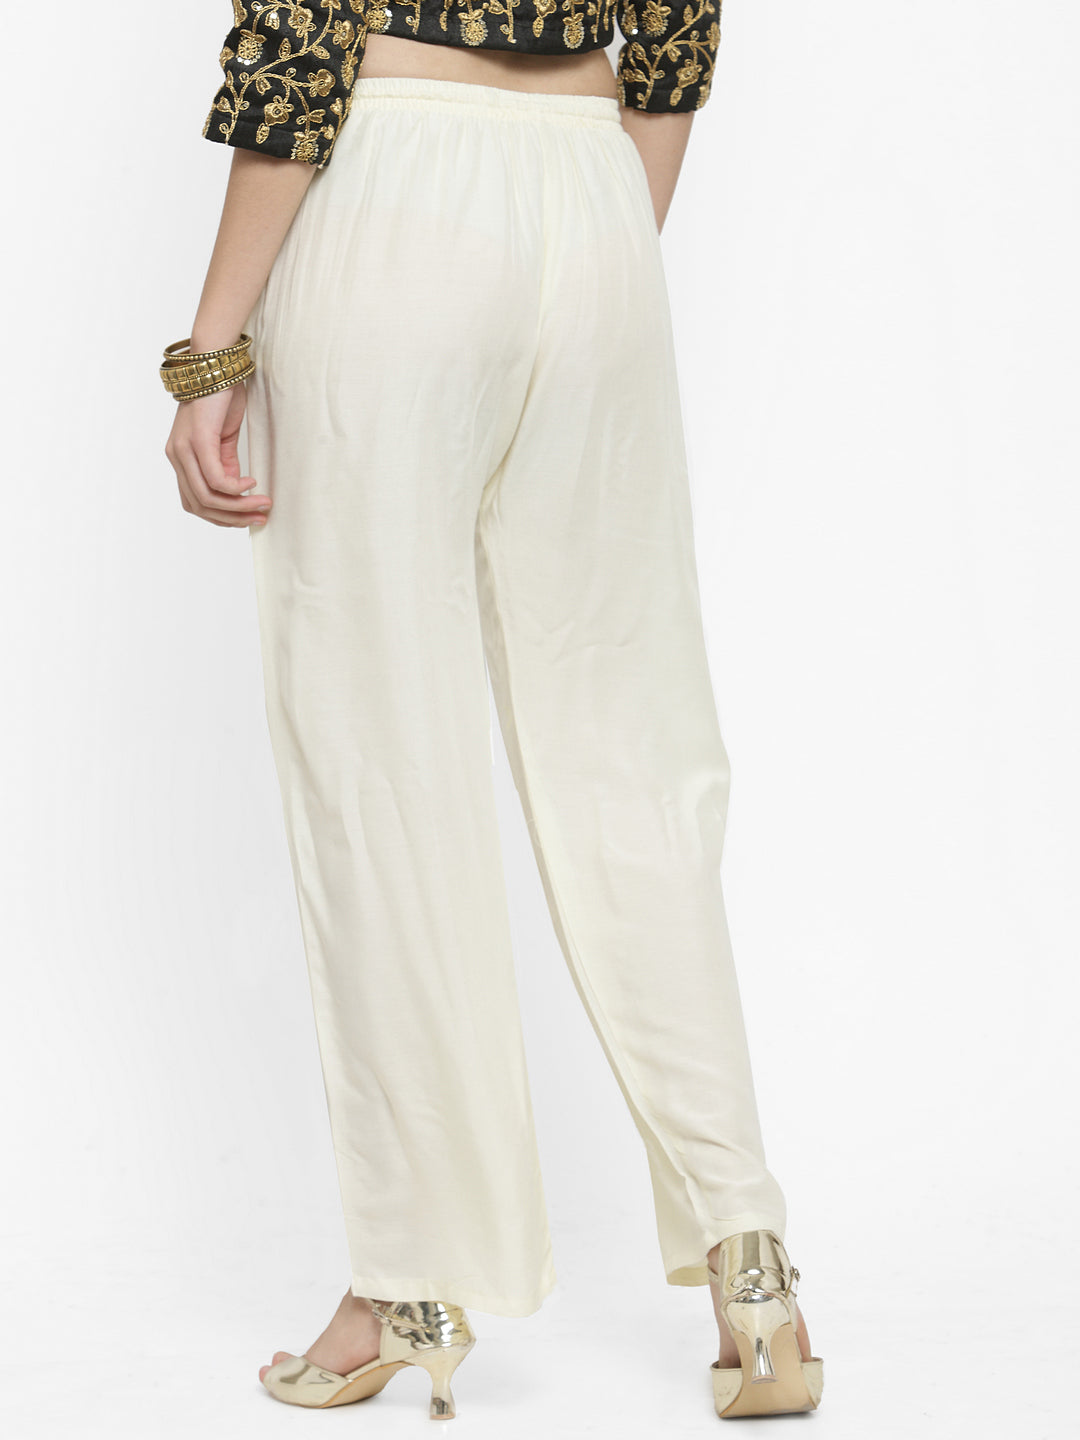 Women's Off-White Solid Rayon Palazzo - Wahe-NOOR